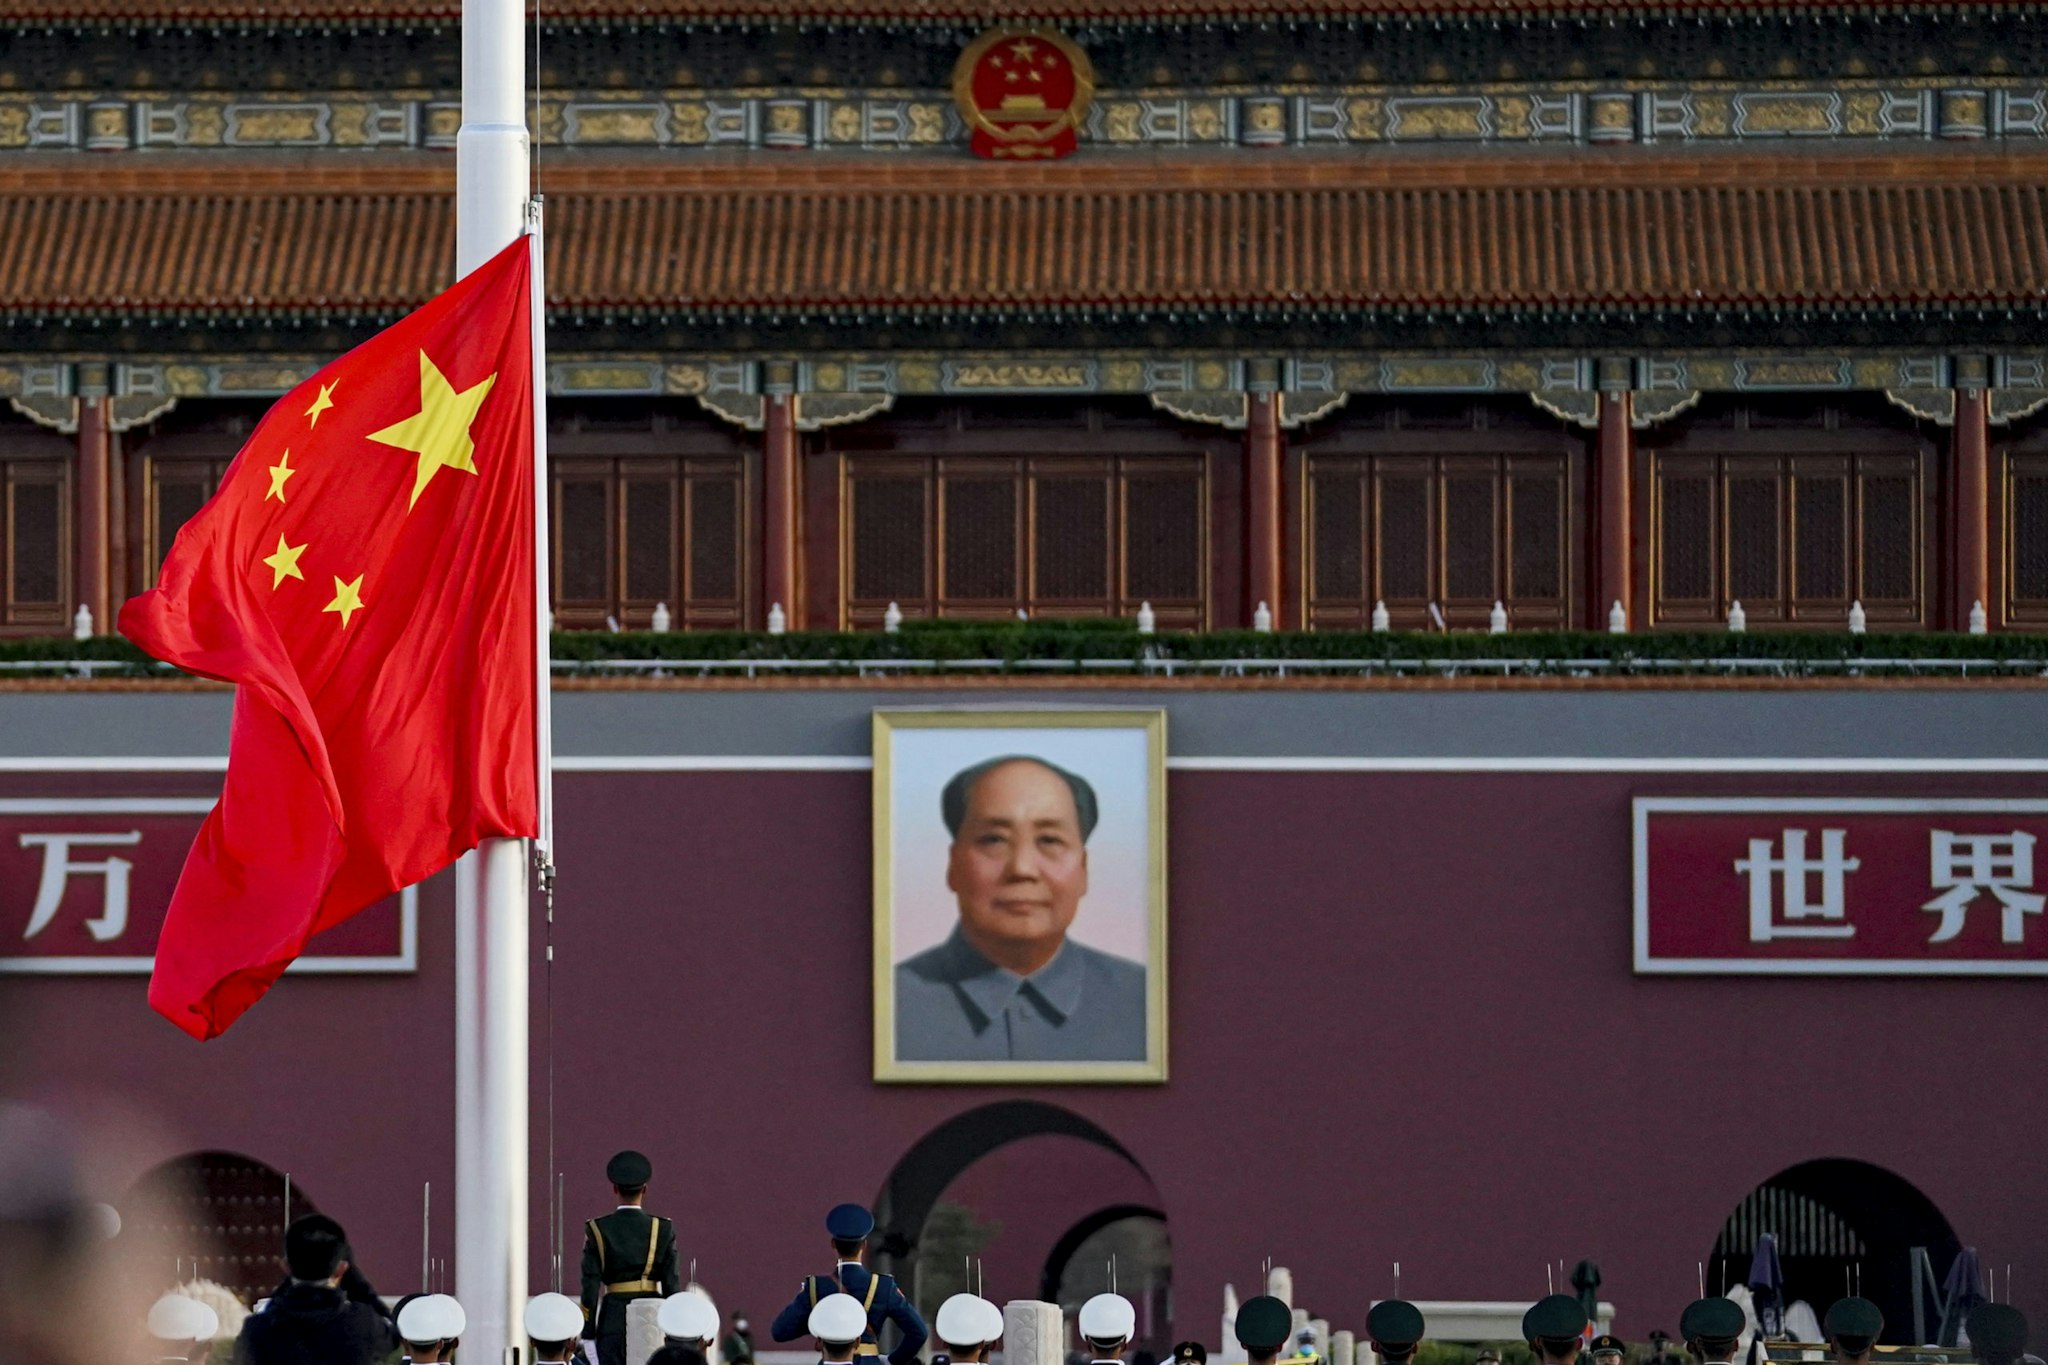 BEIJING, CHINA - APRIL 04: The Chinese national flag flies at half-mast at the Tienanmen Square to mourn victims of COVID-19 on April 04, 2020 in Beijing, China. China will hold a national mourning on Saturday for martyrs who died in the fight against the novel coronavirus and compatriots died of COVID-19, according to the State Council. During the commemoration, national flags will fly at half-mast across the country as well as in all Chinese embassies and consulates abroad. Public recreational activities will be suspended. At 10:00 am on Saturday, the country will observe three minutes of silence to mourn for the diseased, while air raid sirens and horns of automobiles, trains and ships will wail in grief. (Photo by Fred Lee/Getty Images)